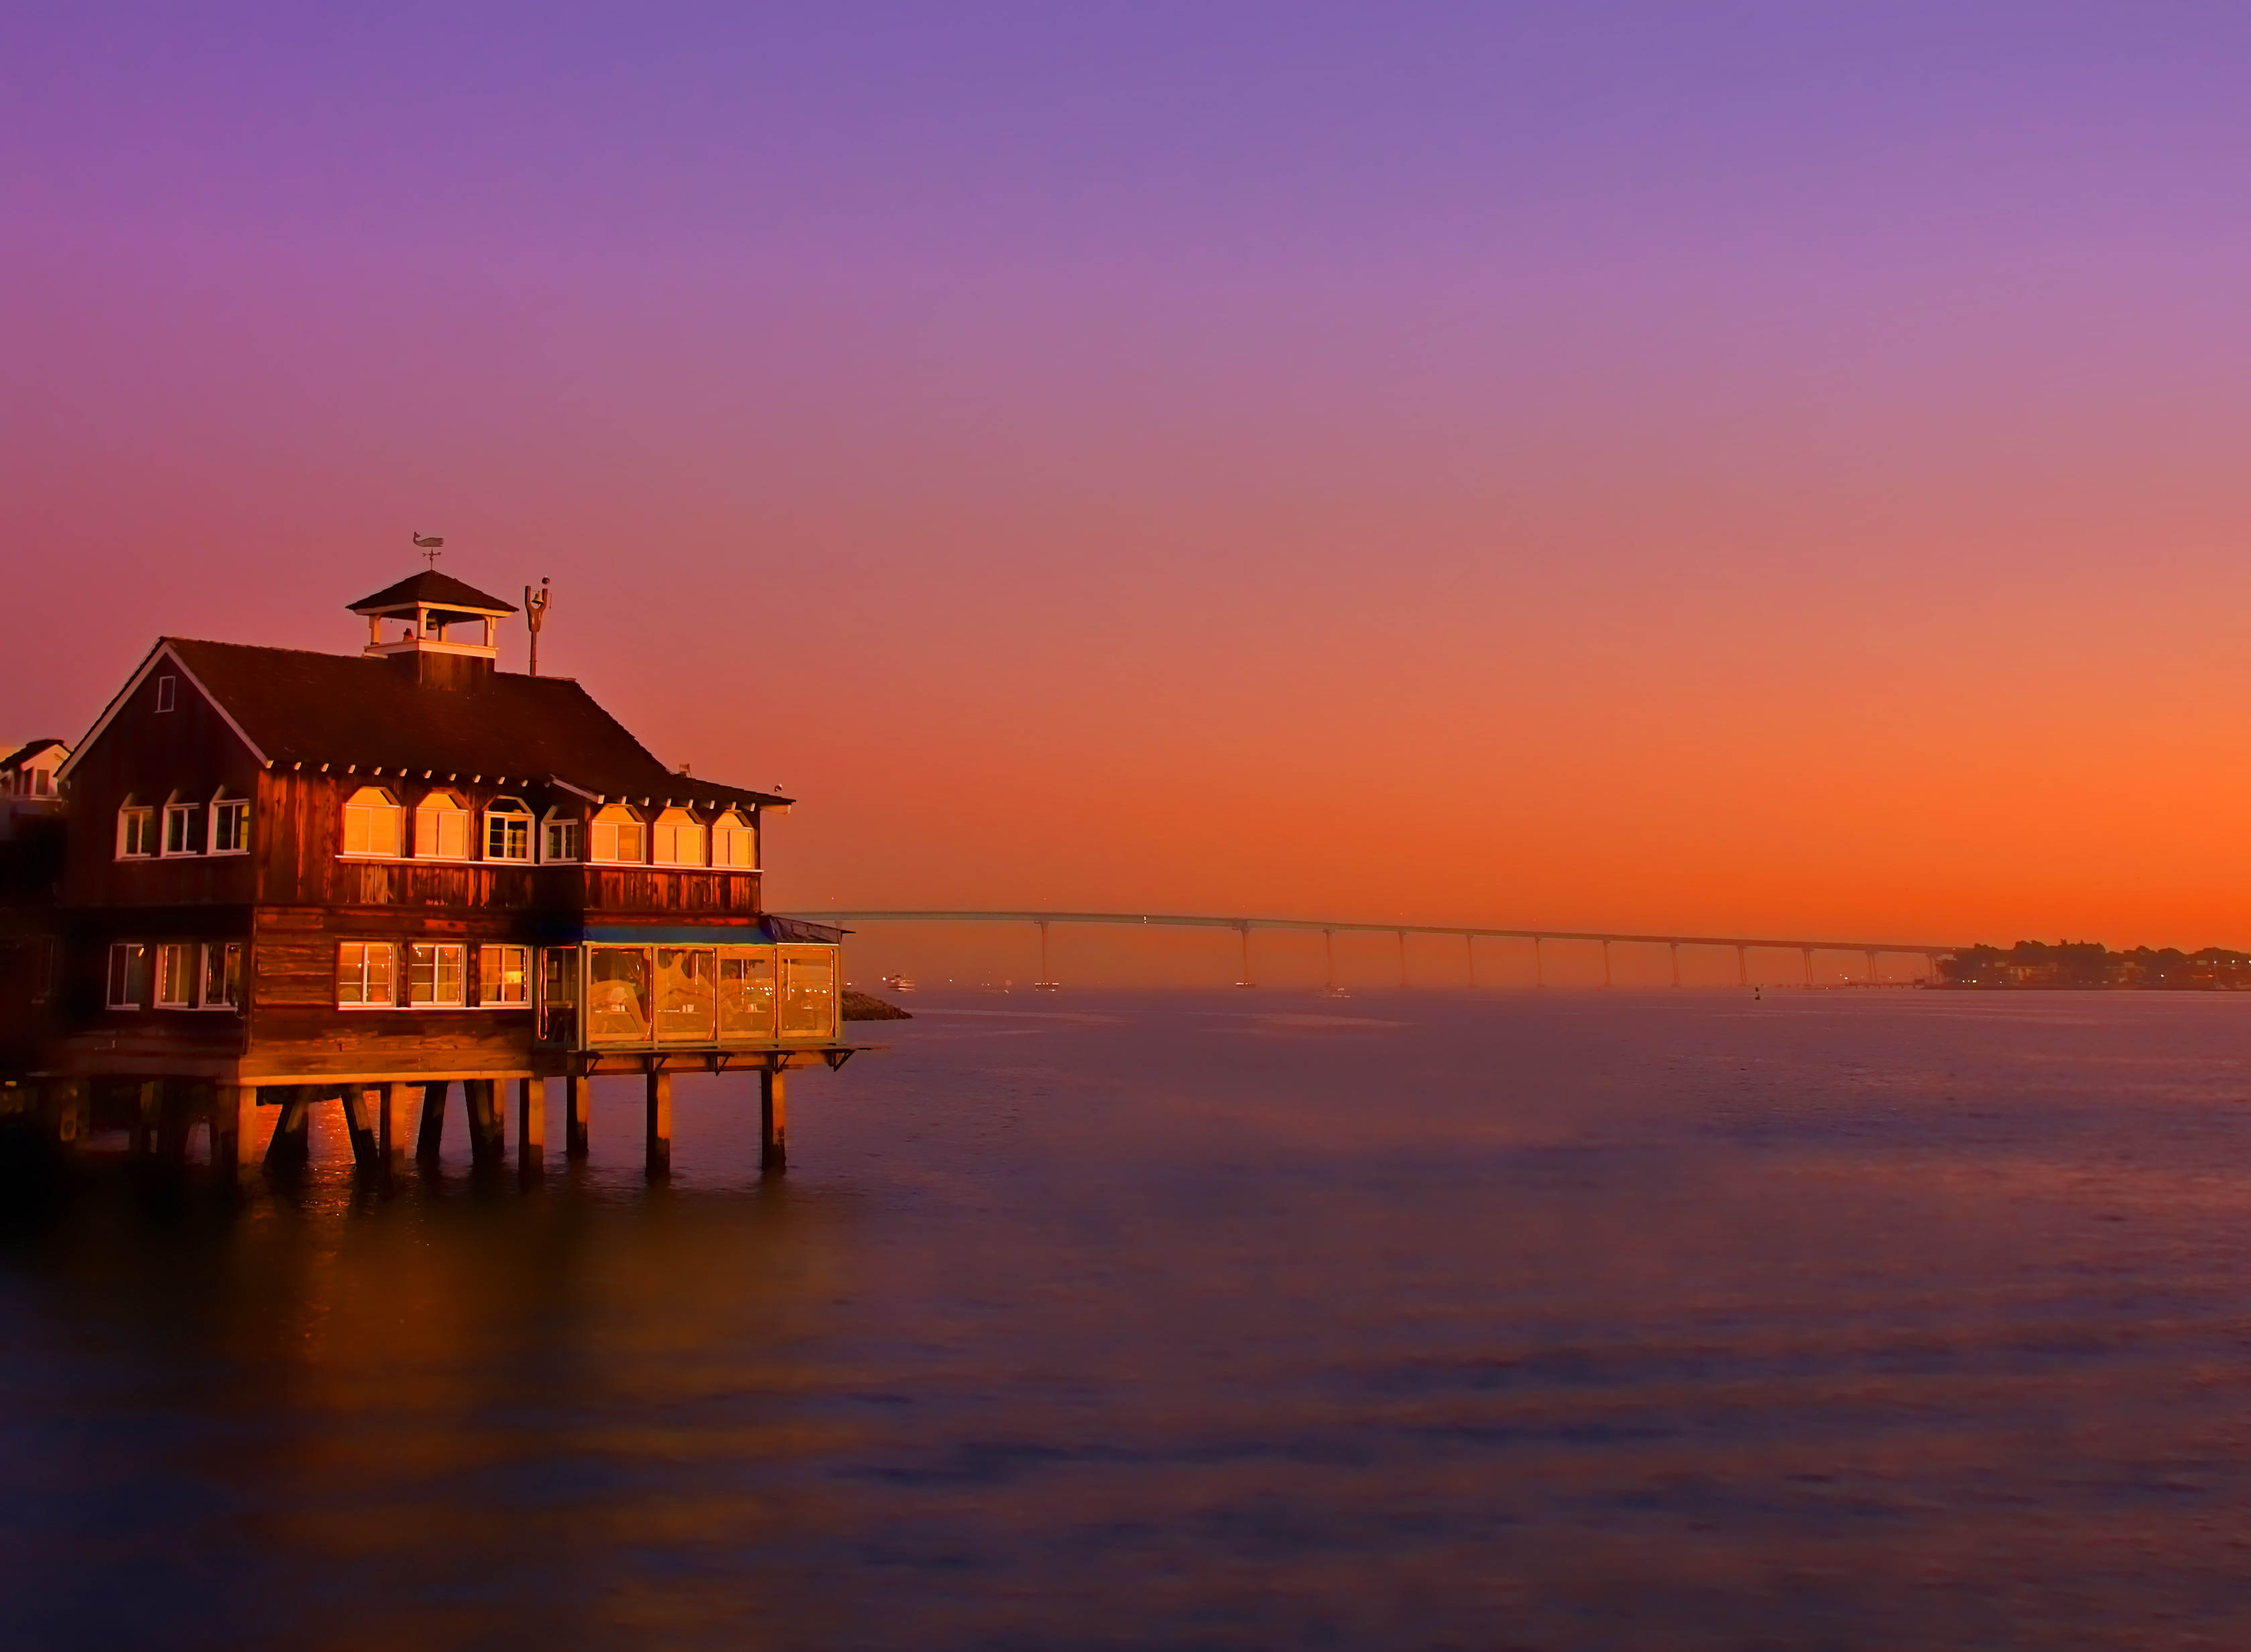 Sunset in Seaport Village, San Diego. | Diana's Blography